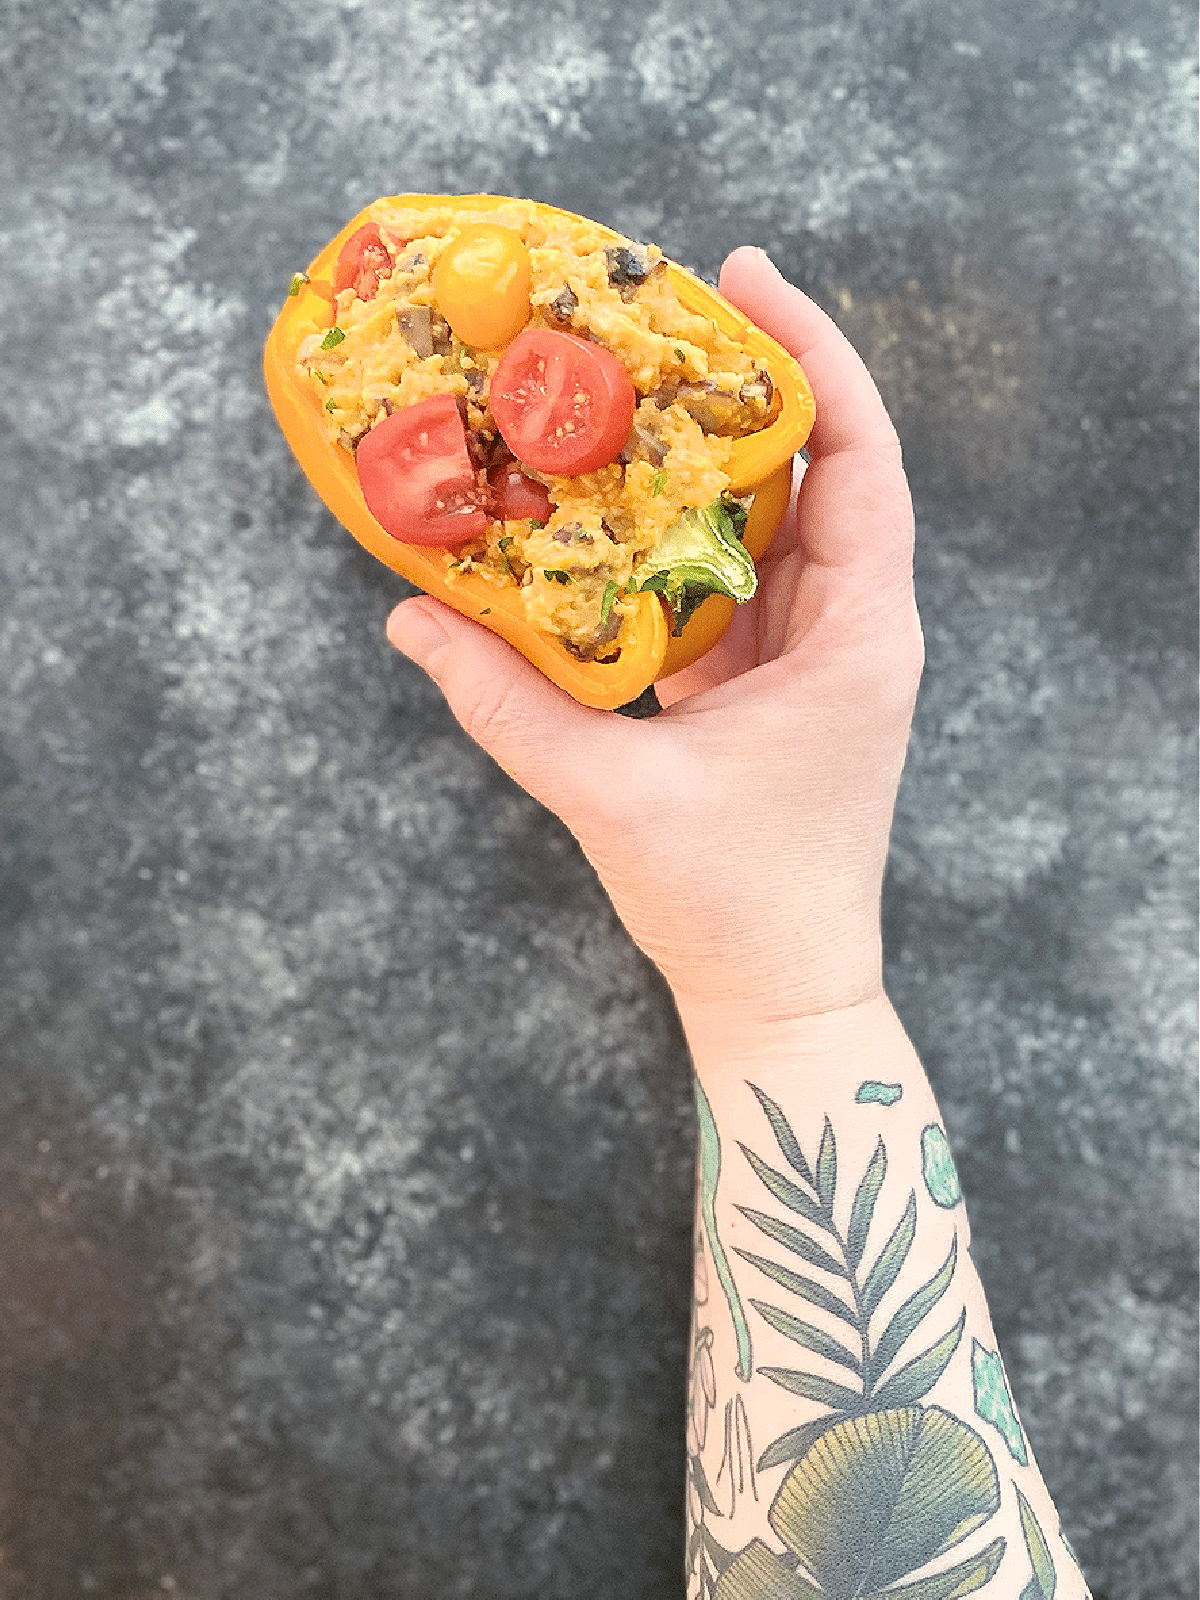 A hand holding a half orange bell pepper stuffed with pizza flavored mushroom polenta, topped with sliced cherry tomatoes. Arm is tattooed with tropical leaves and the Hawaiian islands.